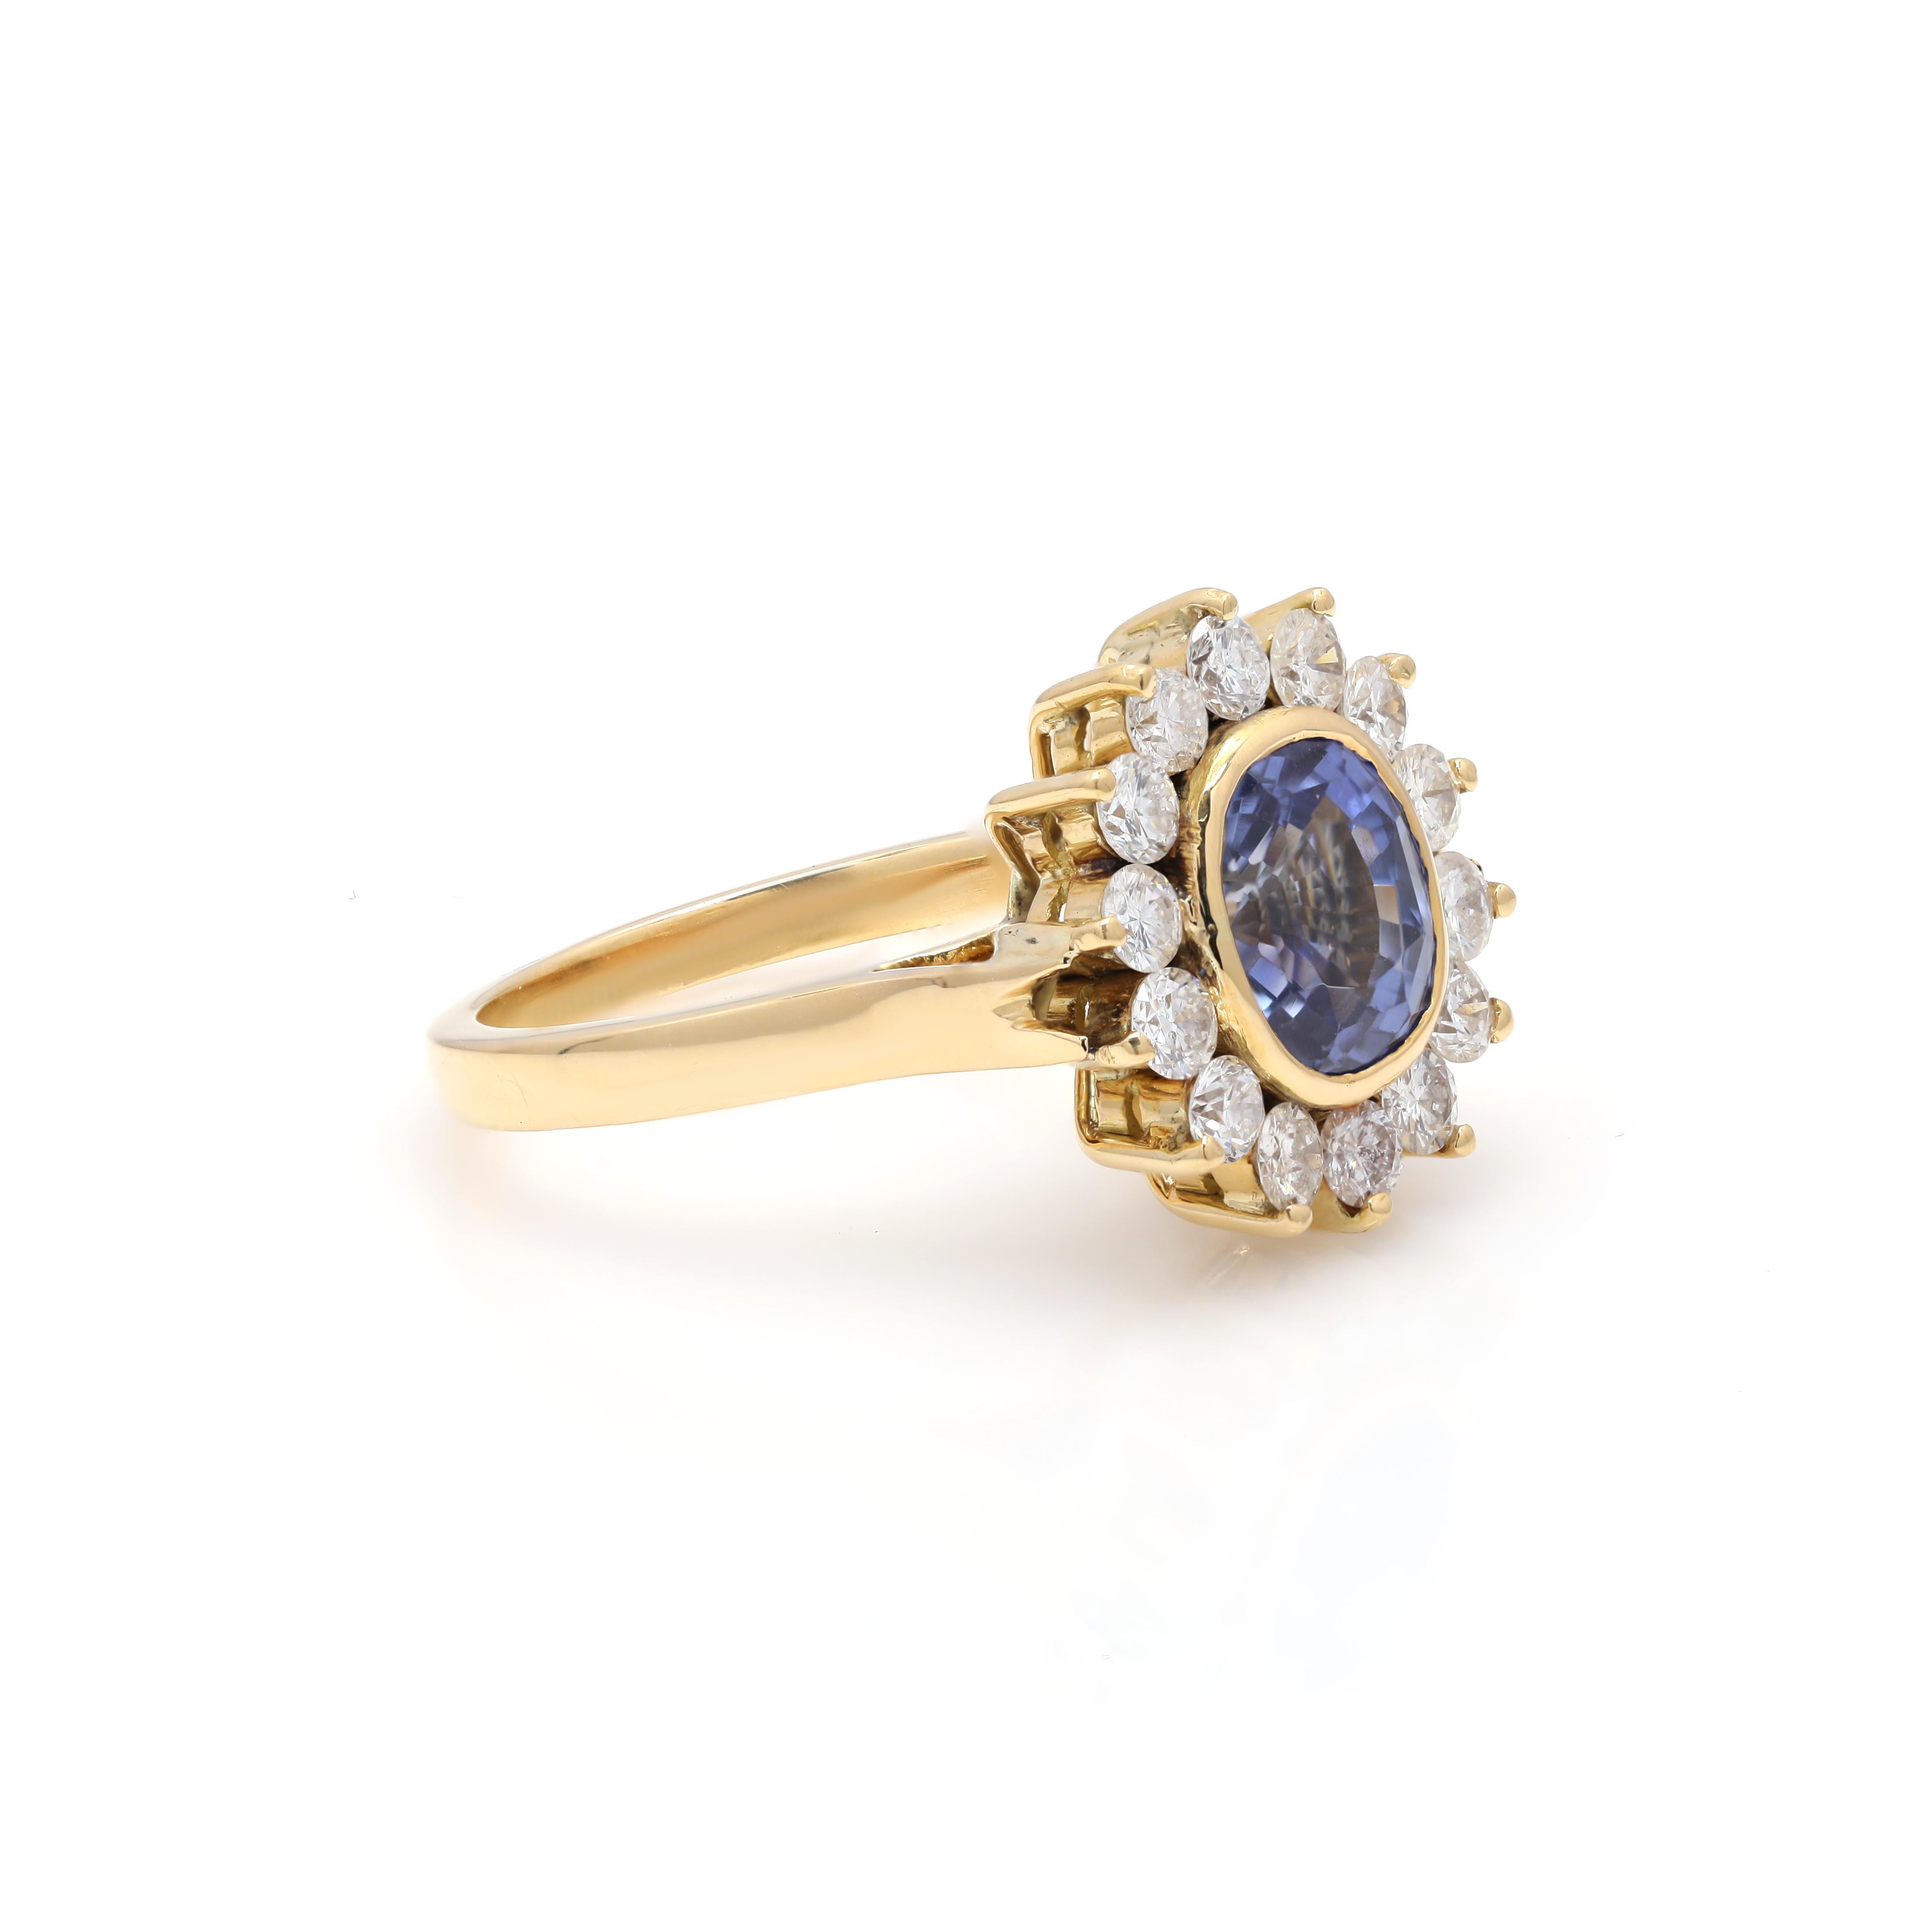 For Sale:  3ct Oval Deep Blue Sapphire Wedding Women Ring with Diamond in 18k Yellow Gold 2